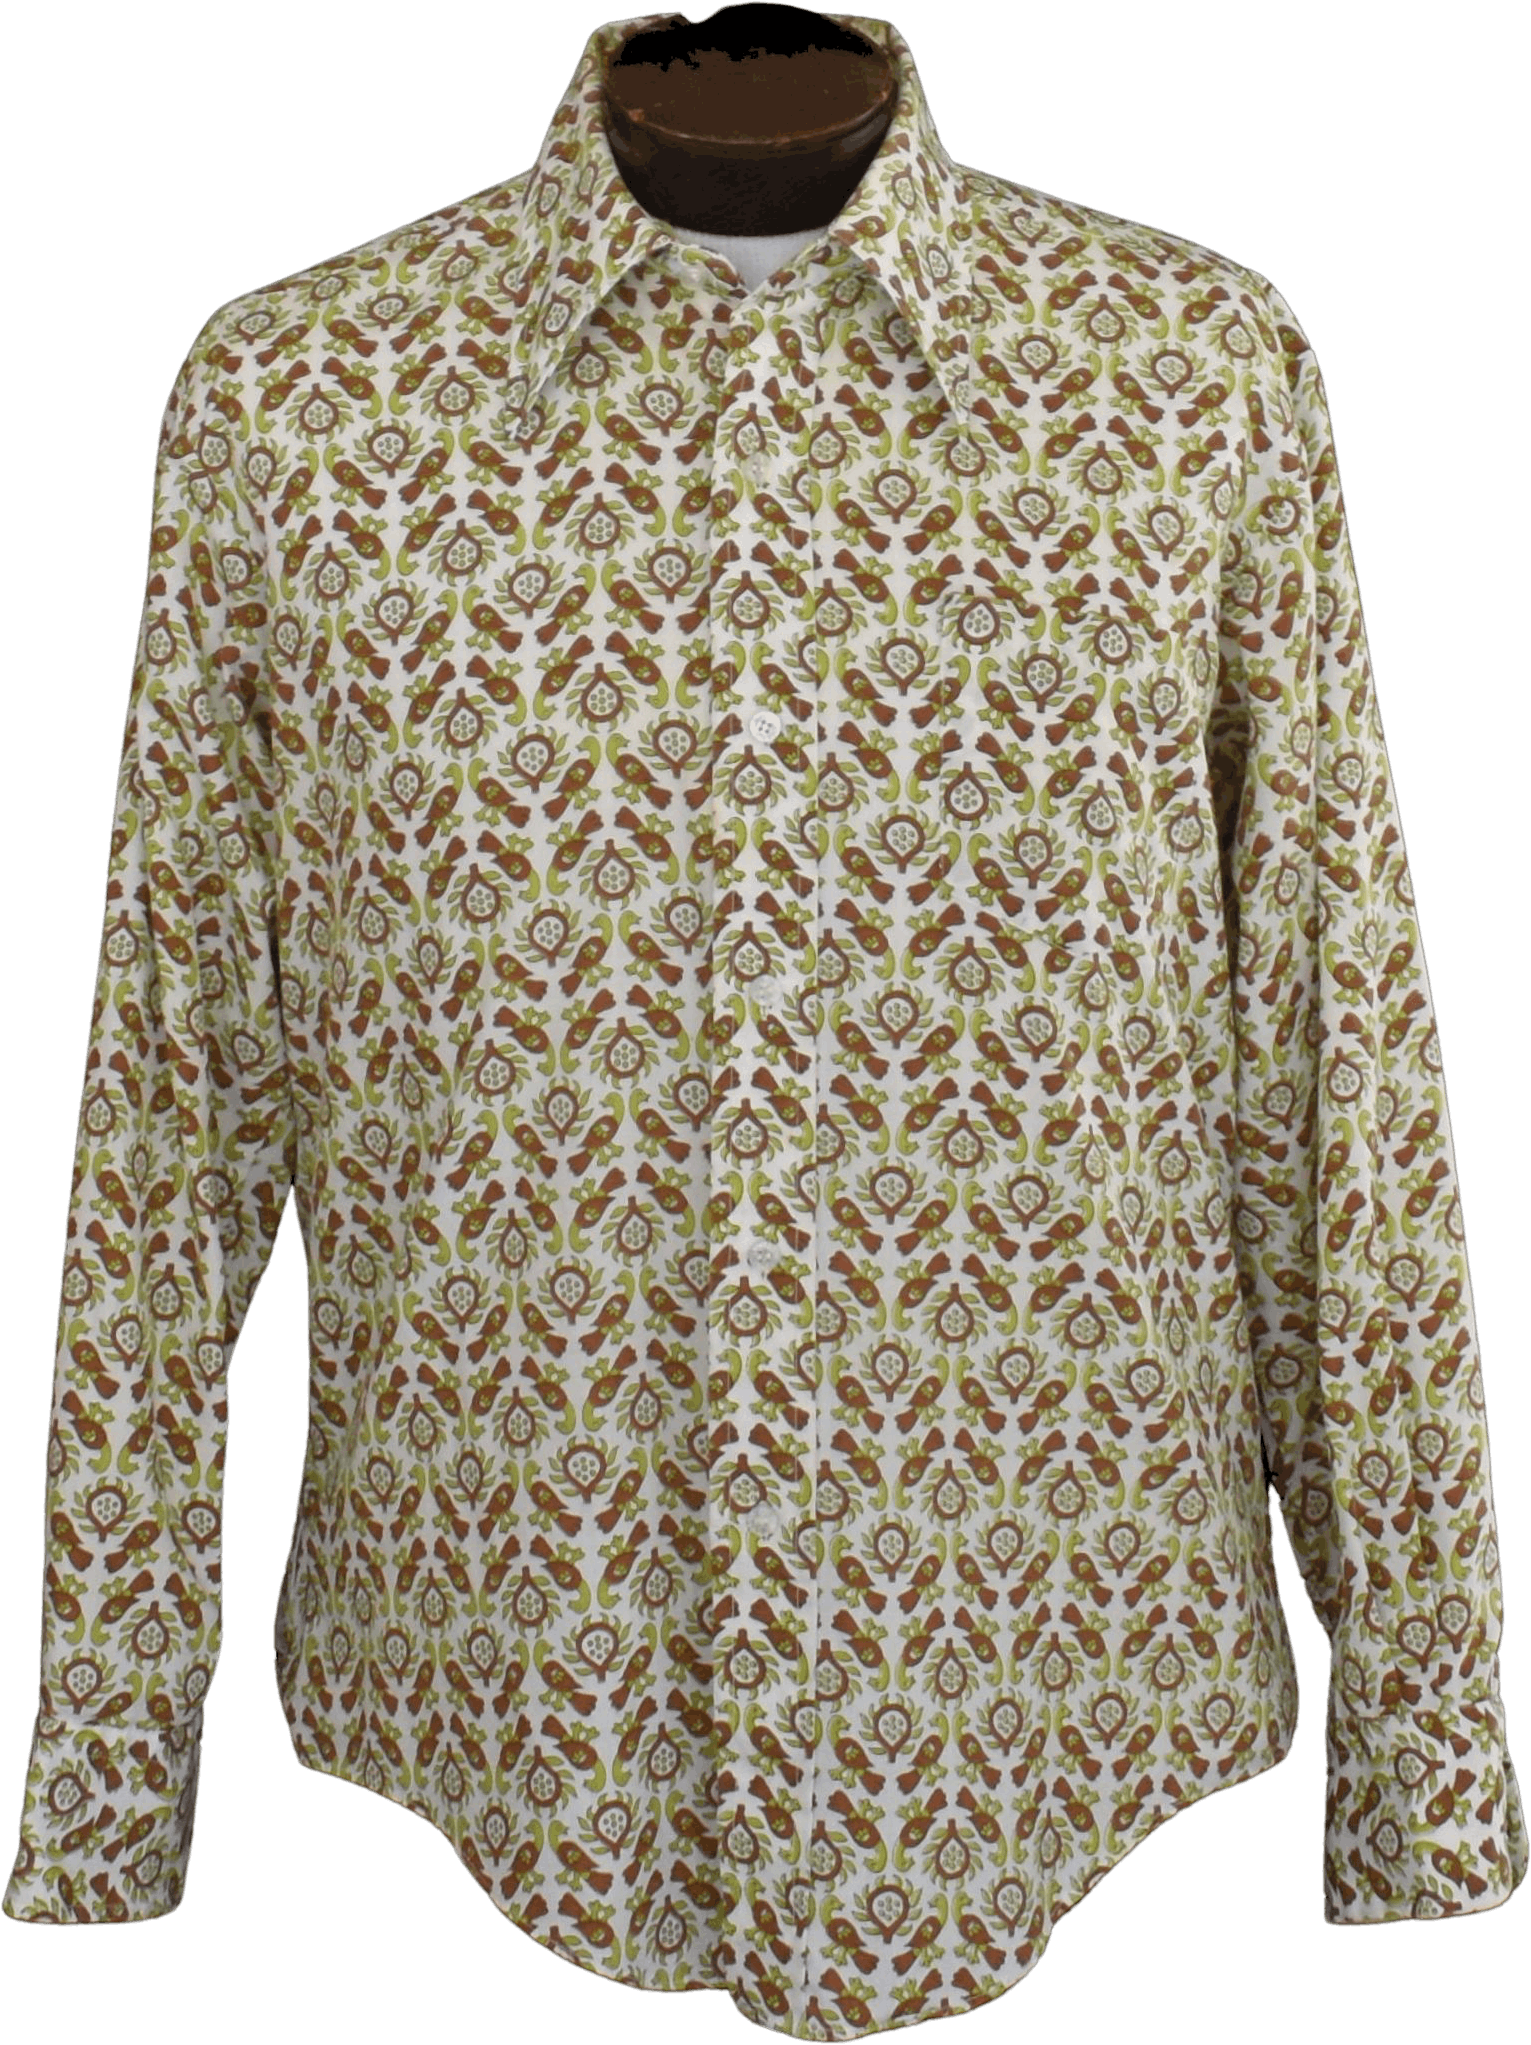 Vintage 70's Peacock Print Mens Shirt by Montgomery Ward | Shop THRILLING